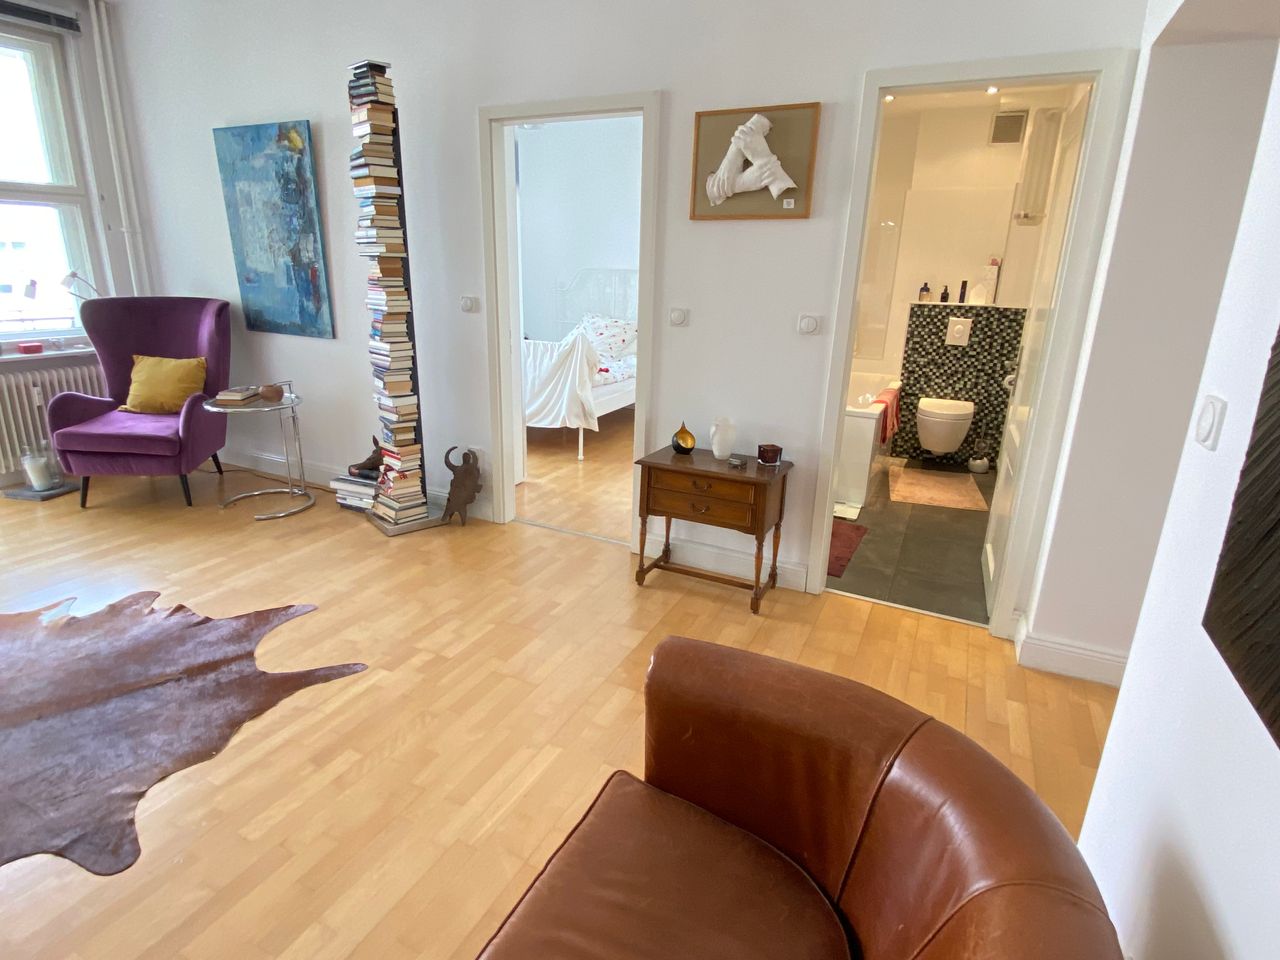 Lovingly furnished apartment in the center of Grunewald, Berlin